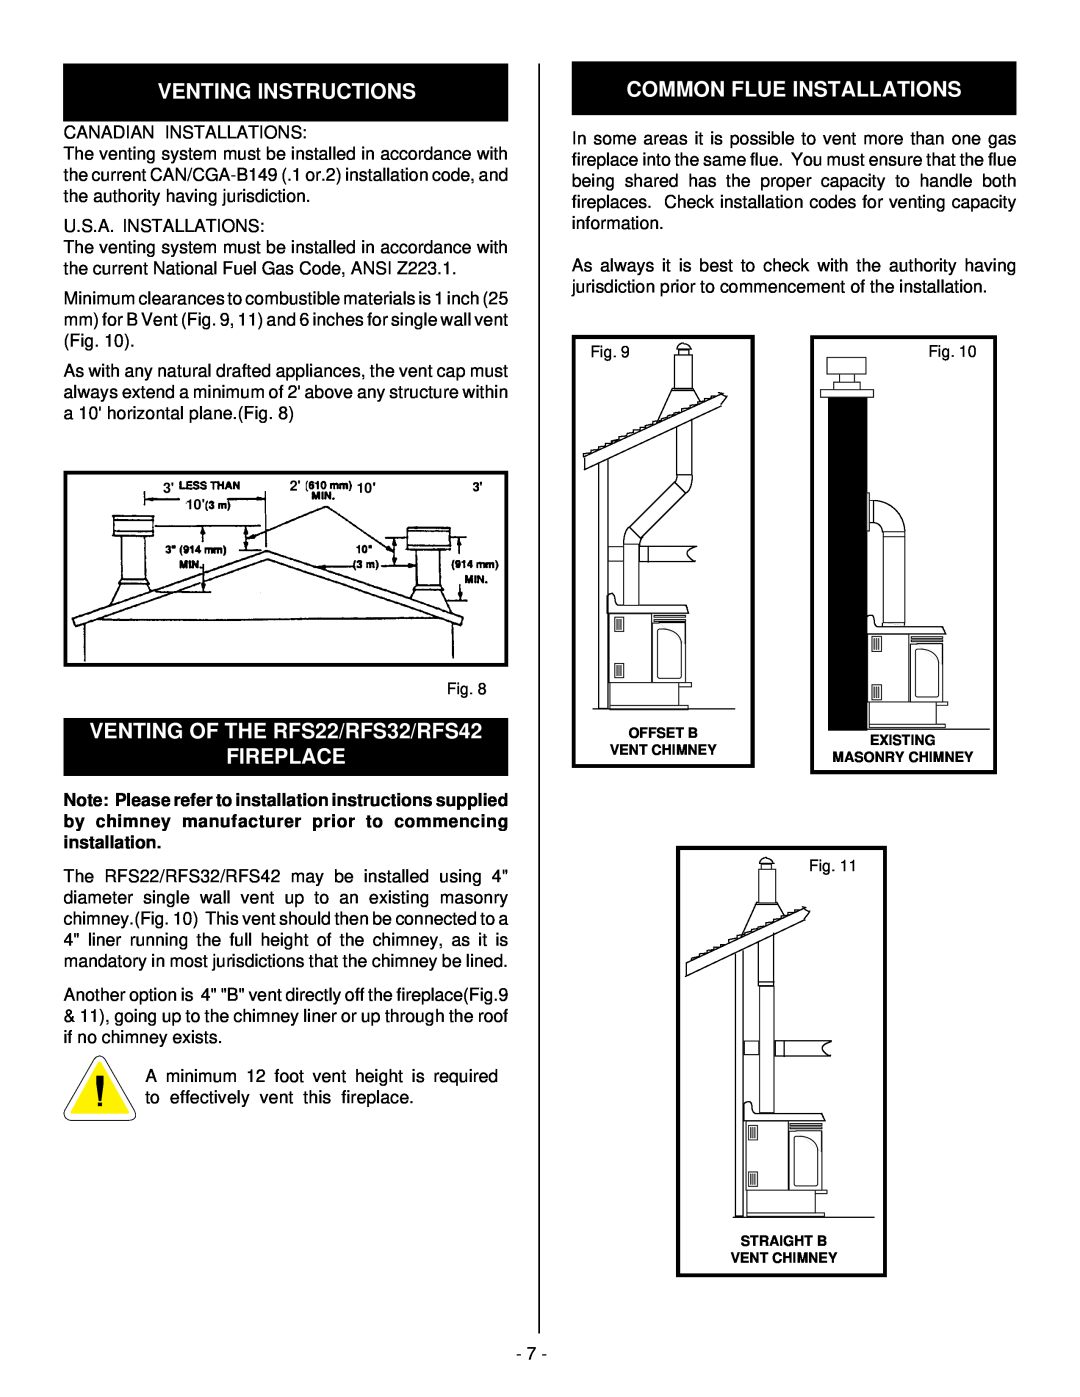 Vermont Casting Venting Instructions, Common Flue Installations, VENTING OF THE RFS22/RFS32/RFS42 FIREPLACE 